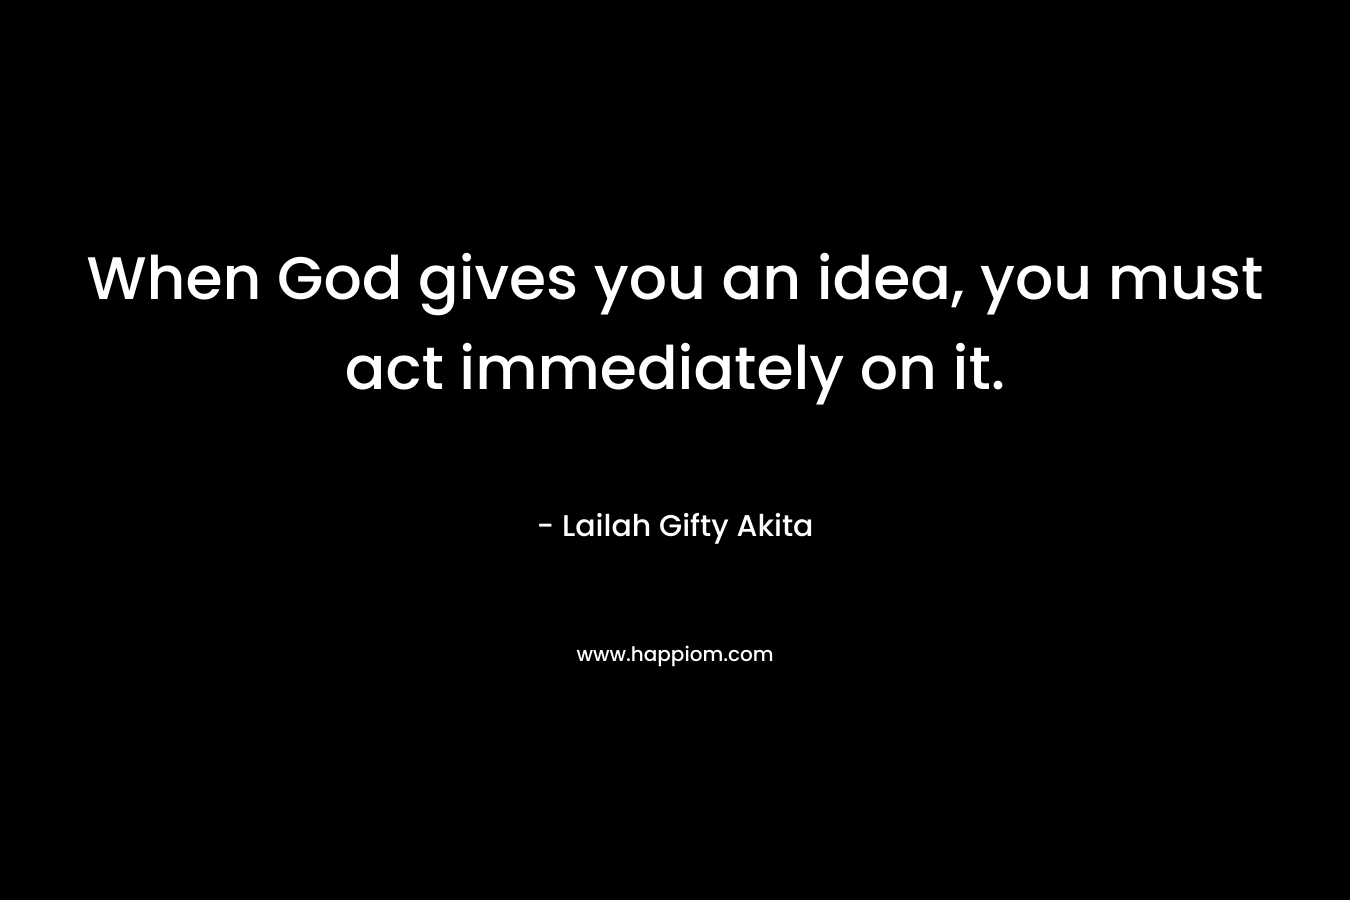 When God gives you an idea, you must act immediately on it.